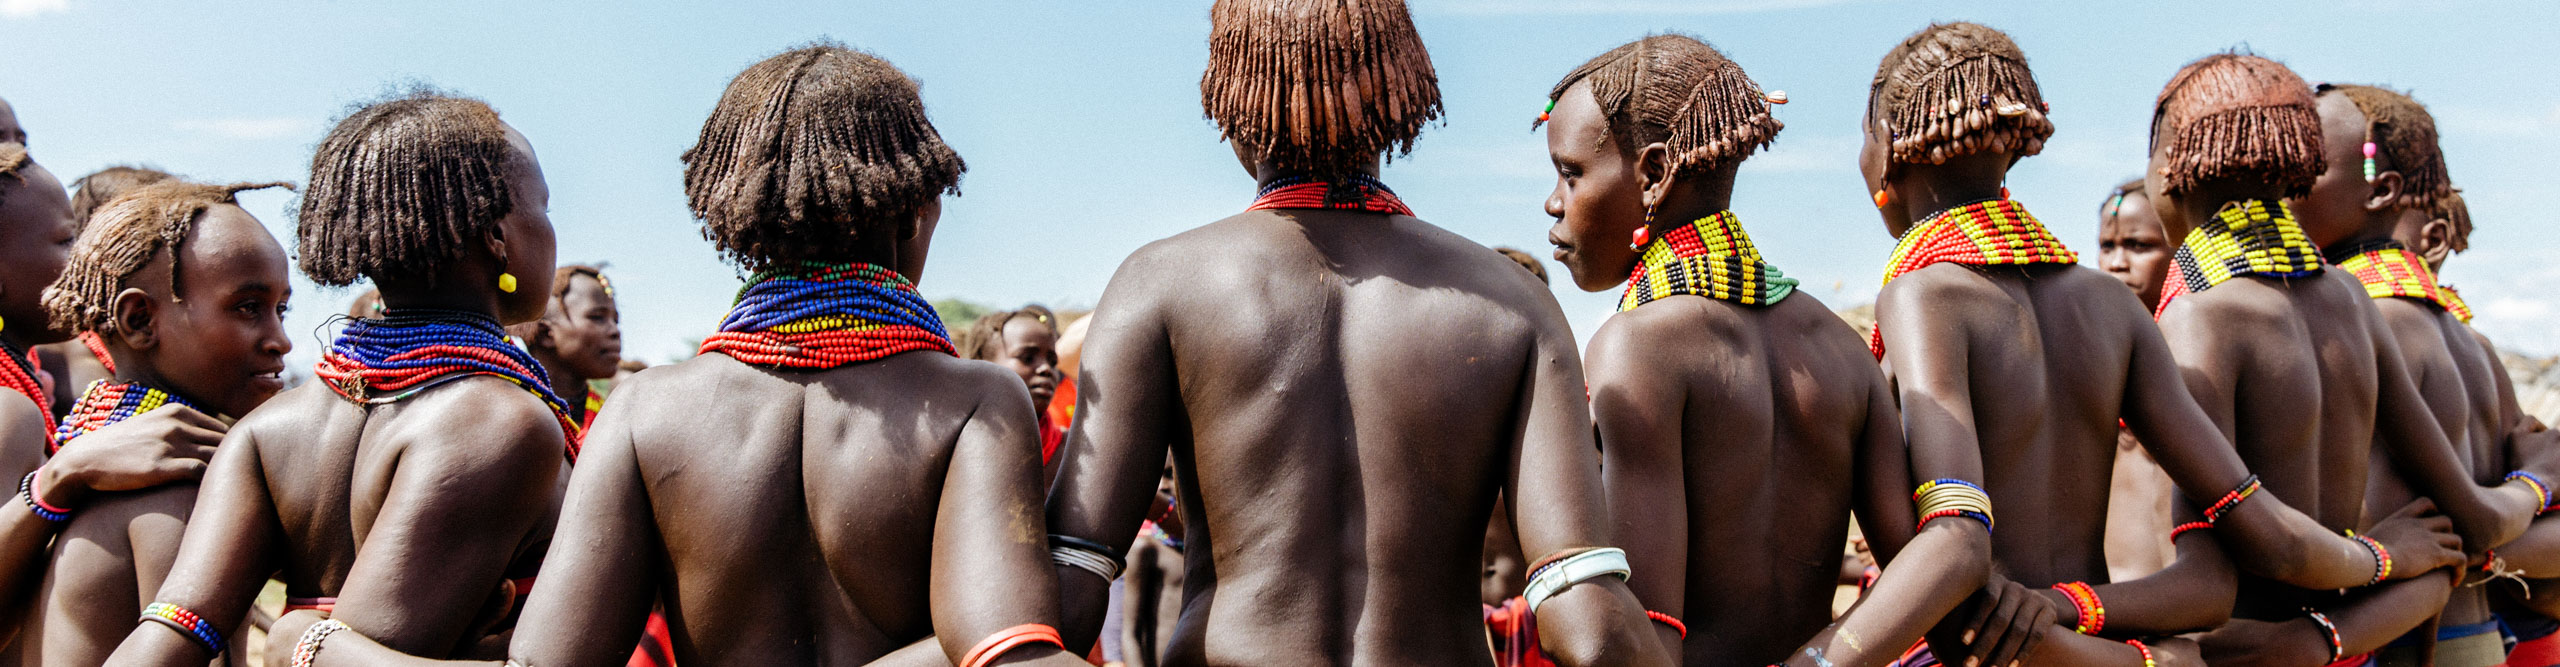 Ethiopian women in tribal dress, with red and black skirts dancing in a circle on a clear sunny day